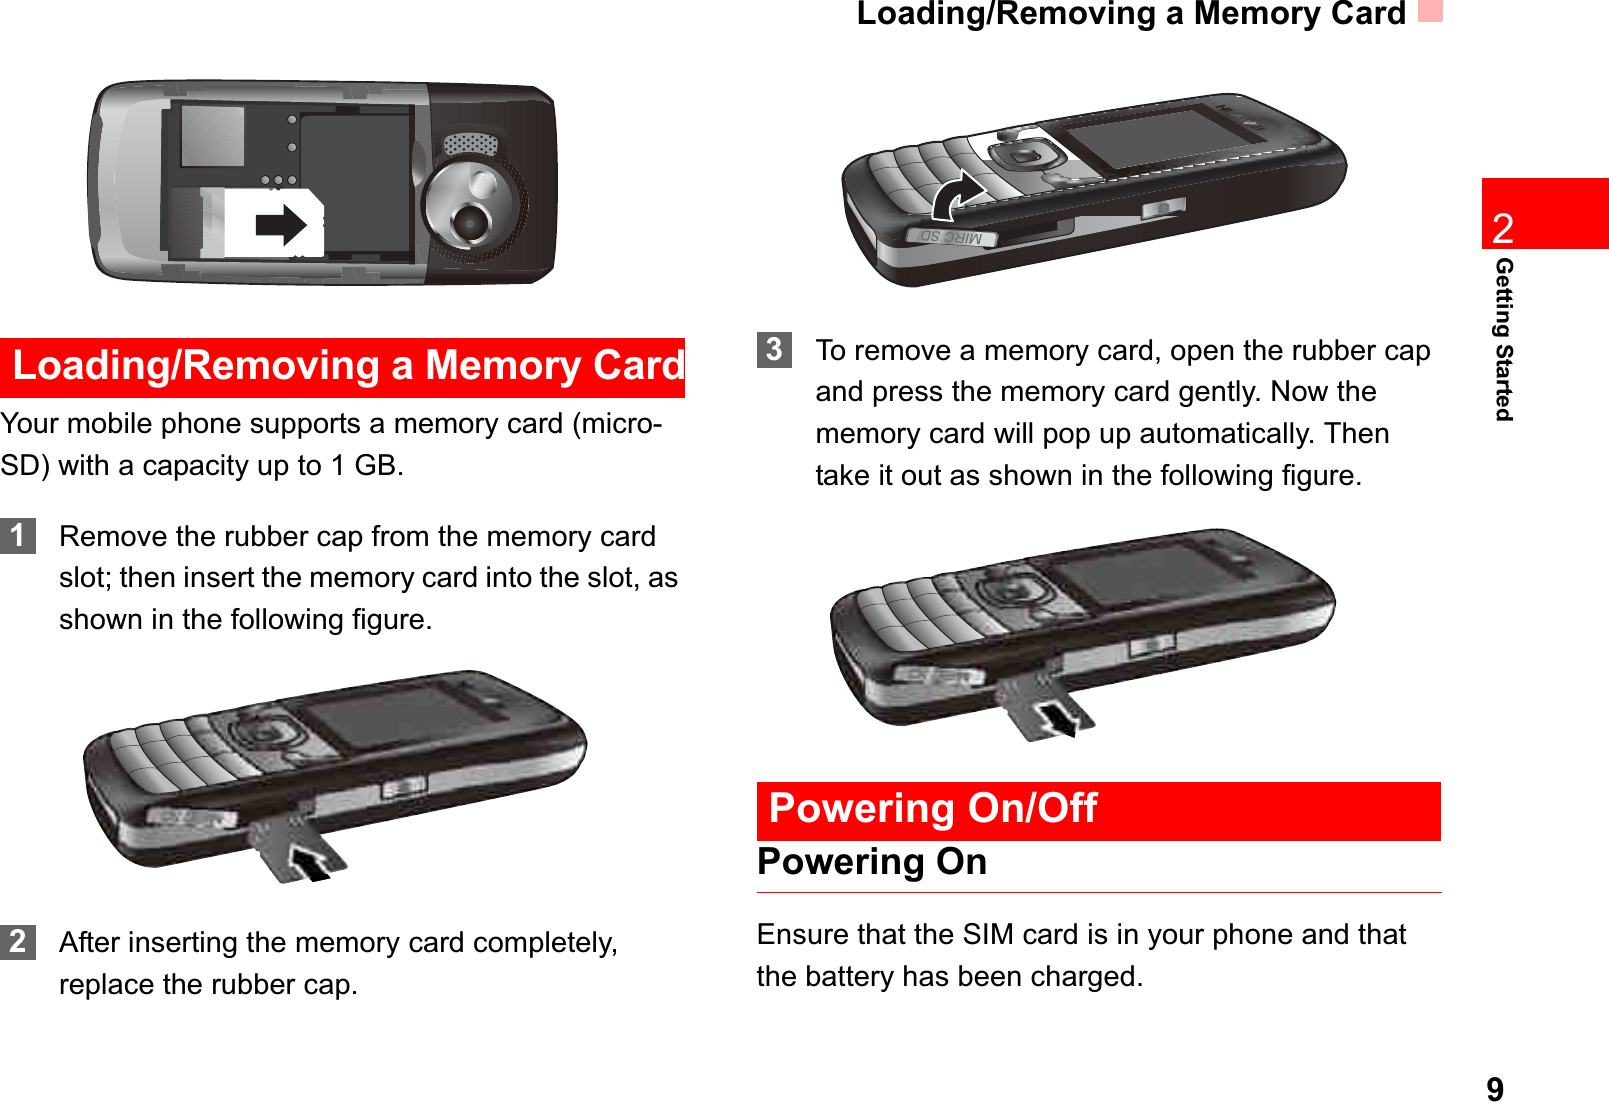 Loading/Removing a Memory Card92Getting StartedLoading/Removing a Memory CardYour mobile phone supports a memory card (micro-SD) with a capacity up to 1 GB.1Remove the rubber cap from the memory card slot; then insert the memory card into the slot, as shown in the following figure.2After inserting the memory card completely, replace the rubber cap.3To remove a memory card, open the rubber cap and press the memory card gently. Now the memory card will pop up automatically. Then take it out as shown in the following figure.Powering On/OffPowering OnEnsure that the SIM card is in your phone and that the battery has been charged.